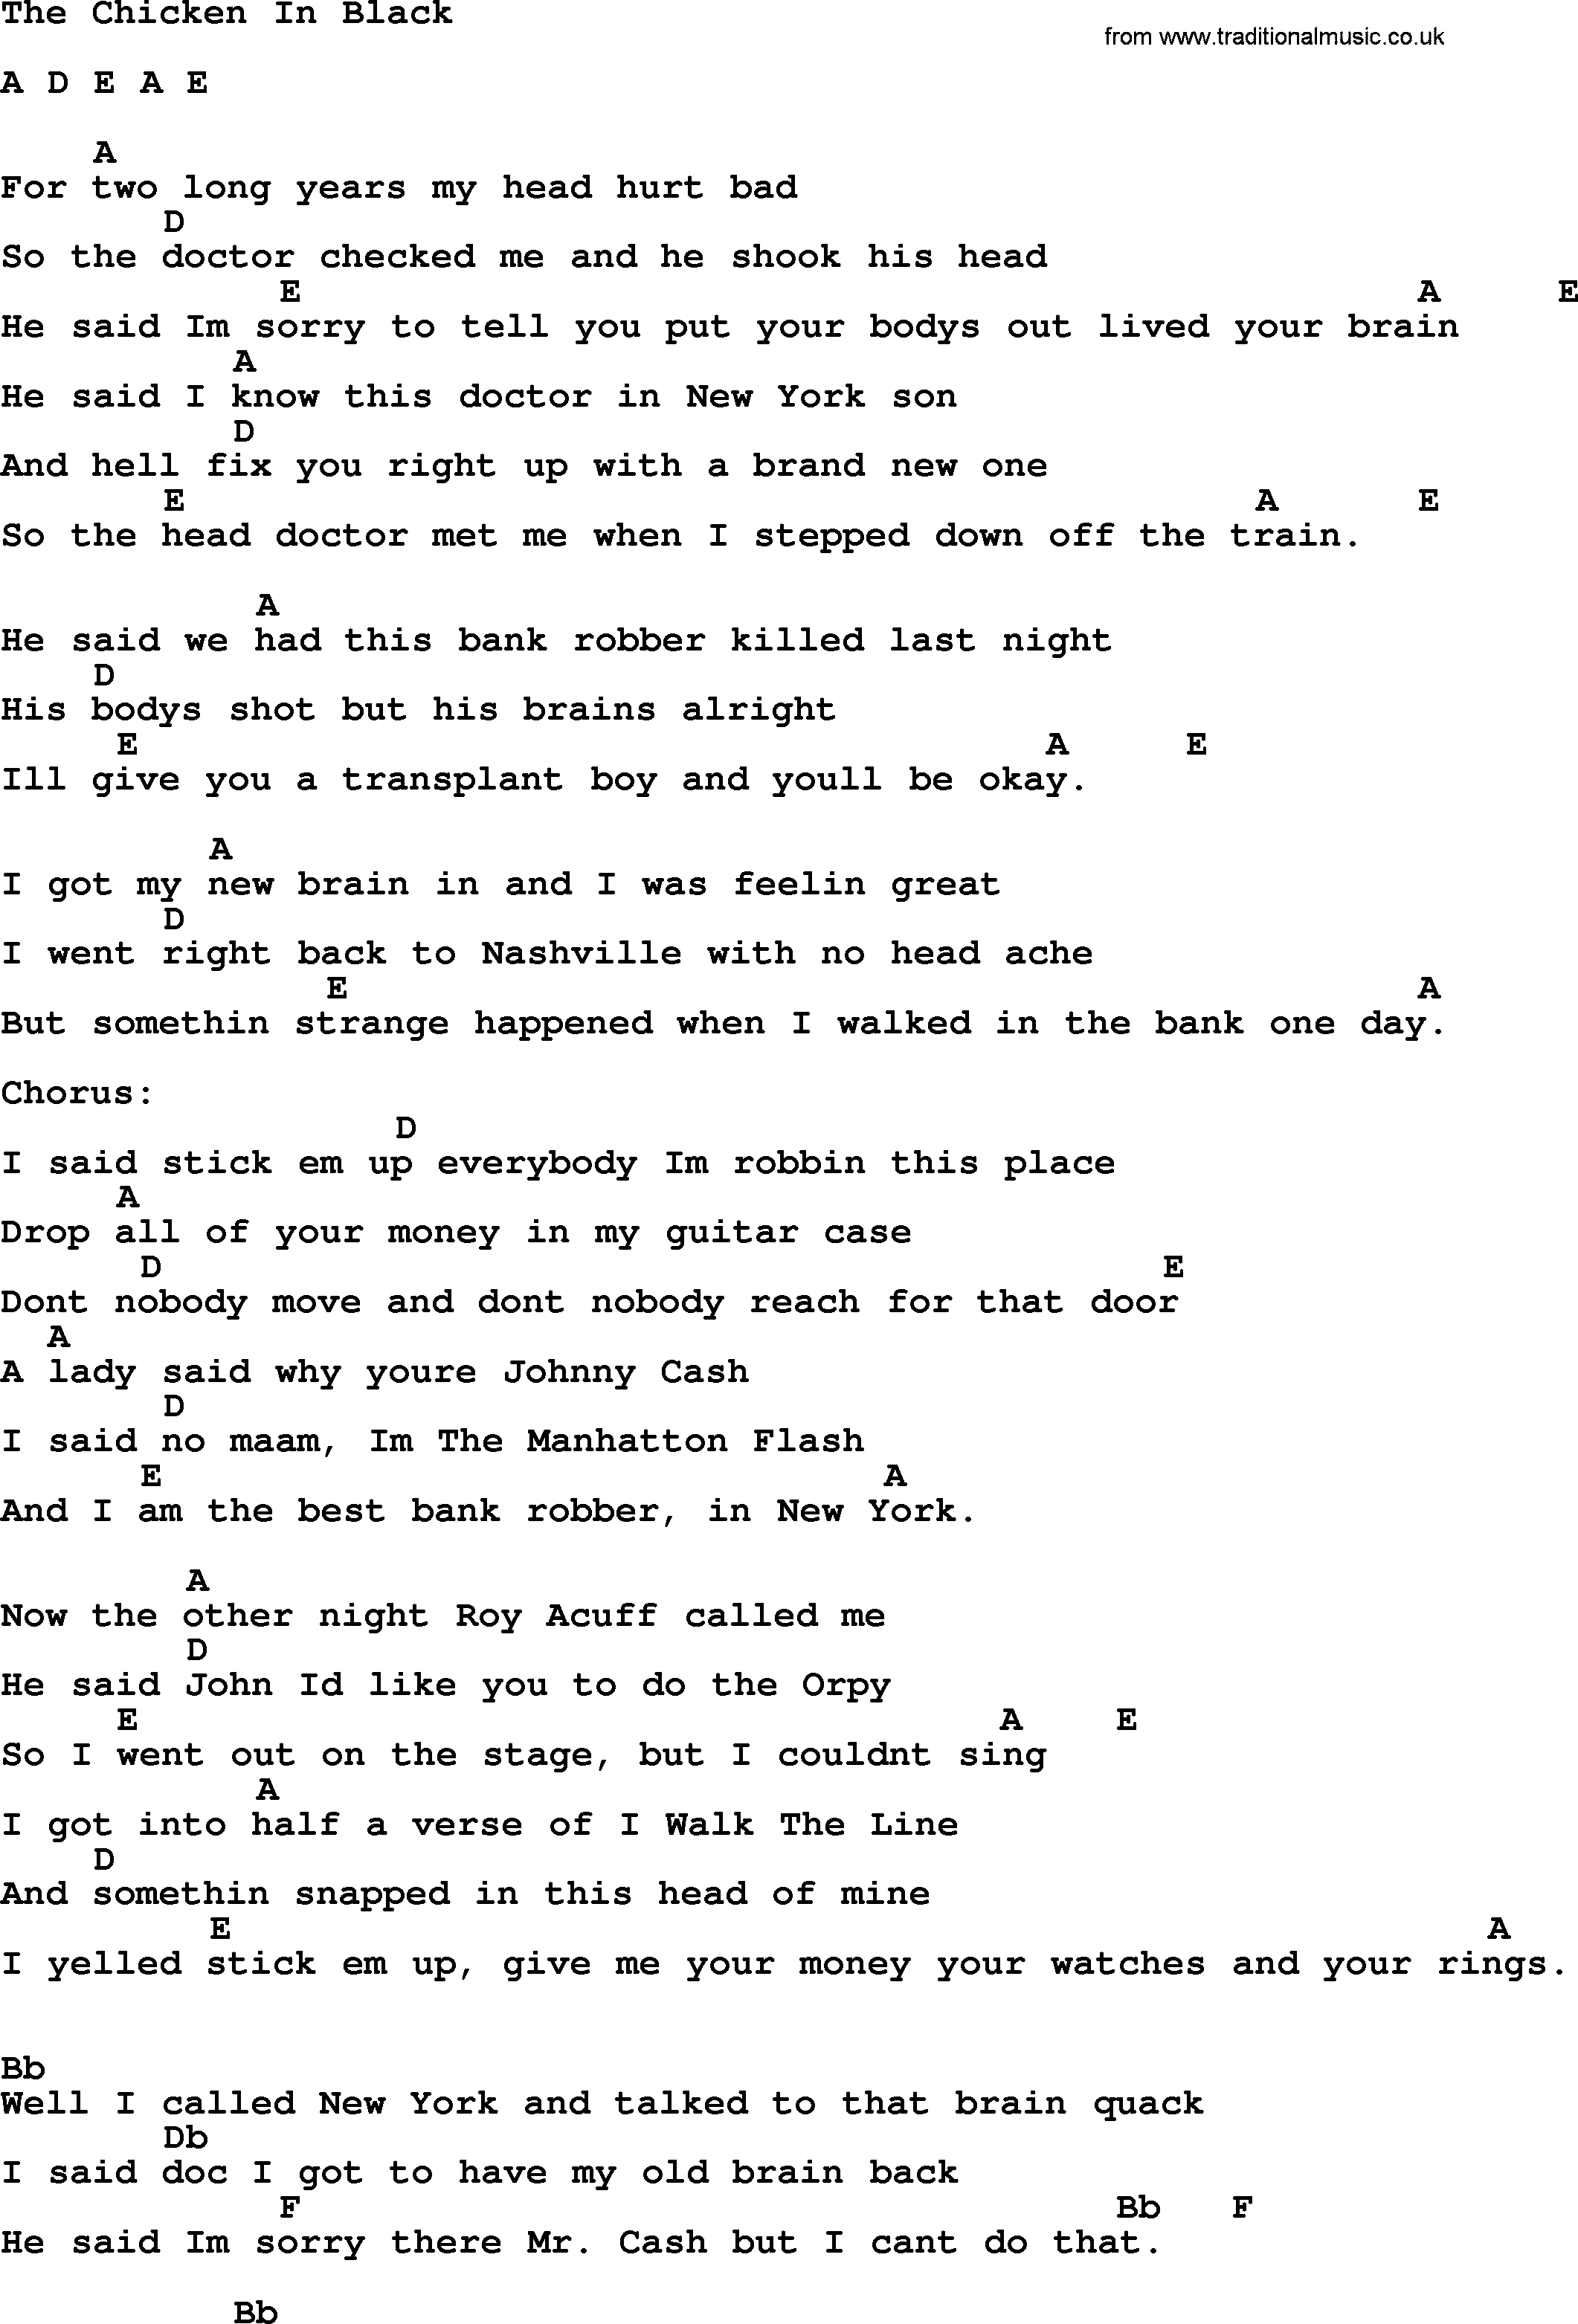 Johnny Cash song The Chicken In Black, lyrics and chords